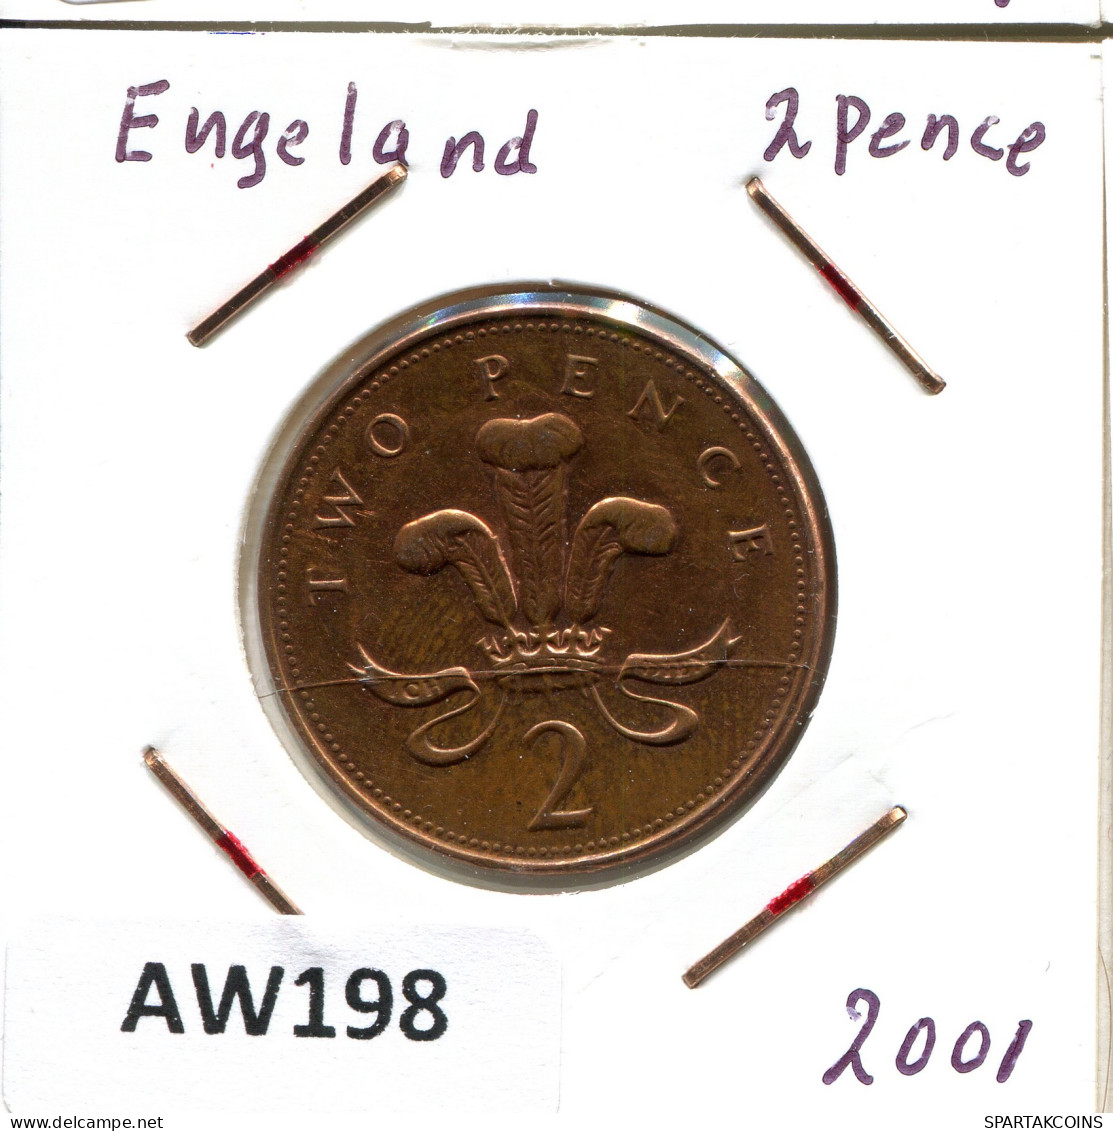 2 PENCE 2001 UK GREAT BRITAIN Coin #AW198.U - 2 Pence & 2 New Pence